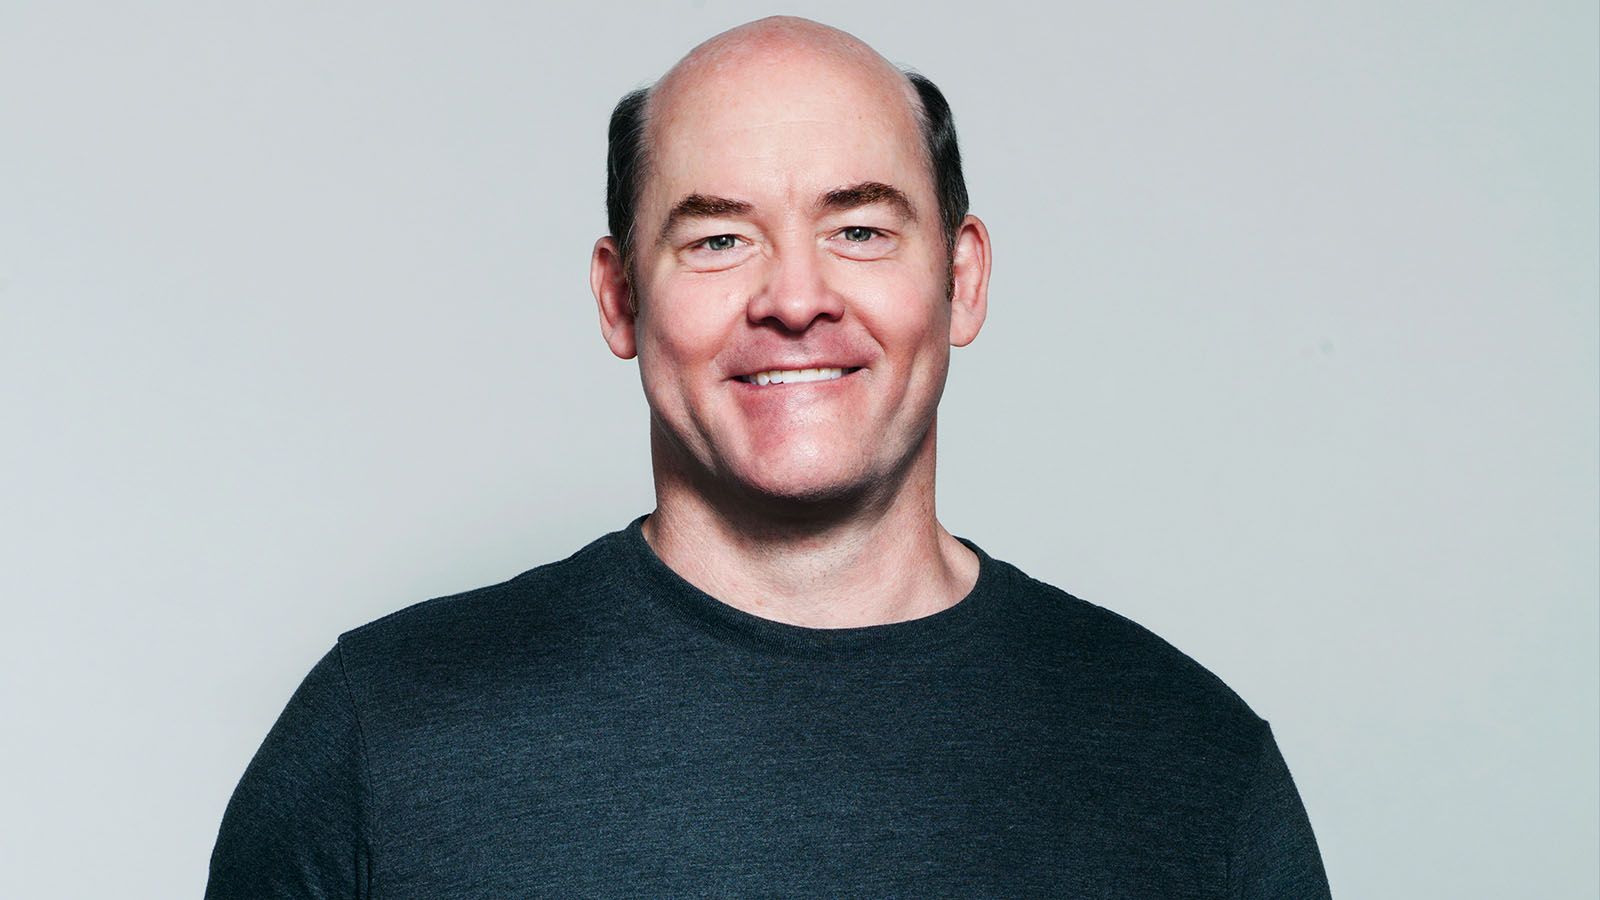 David Koechner will be at Summit City Comedy Club, May 4-6.